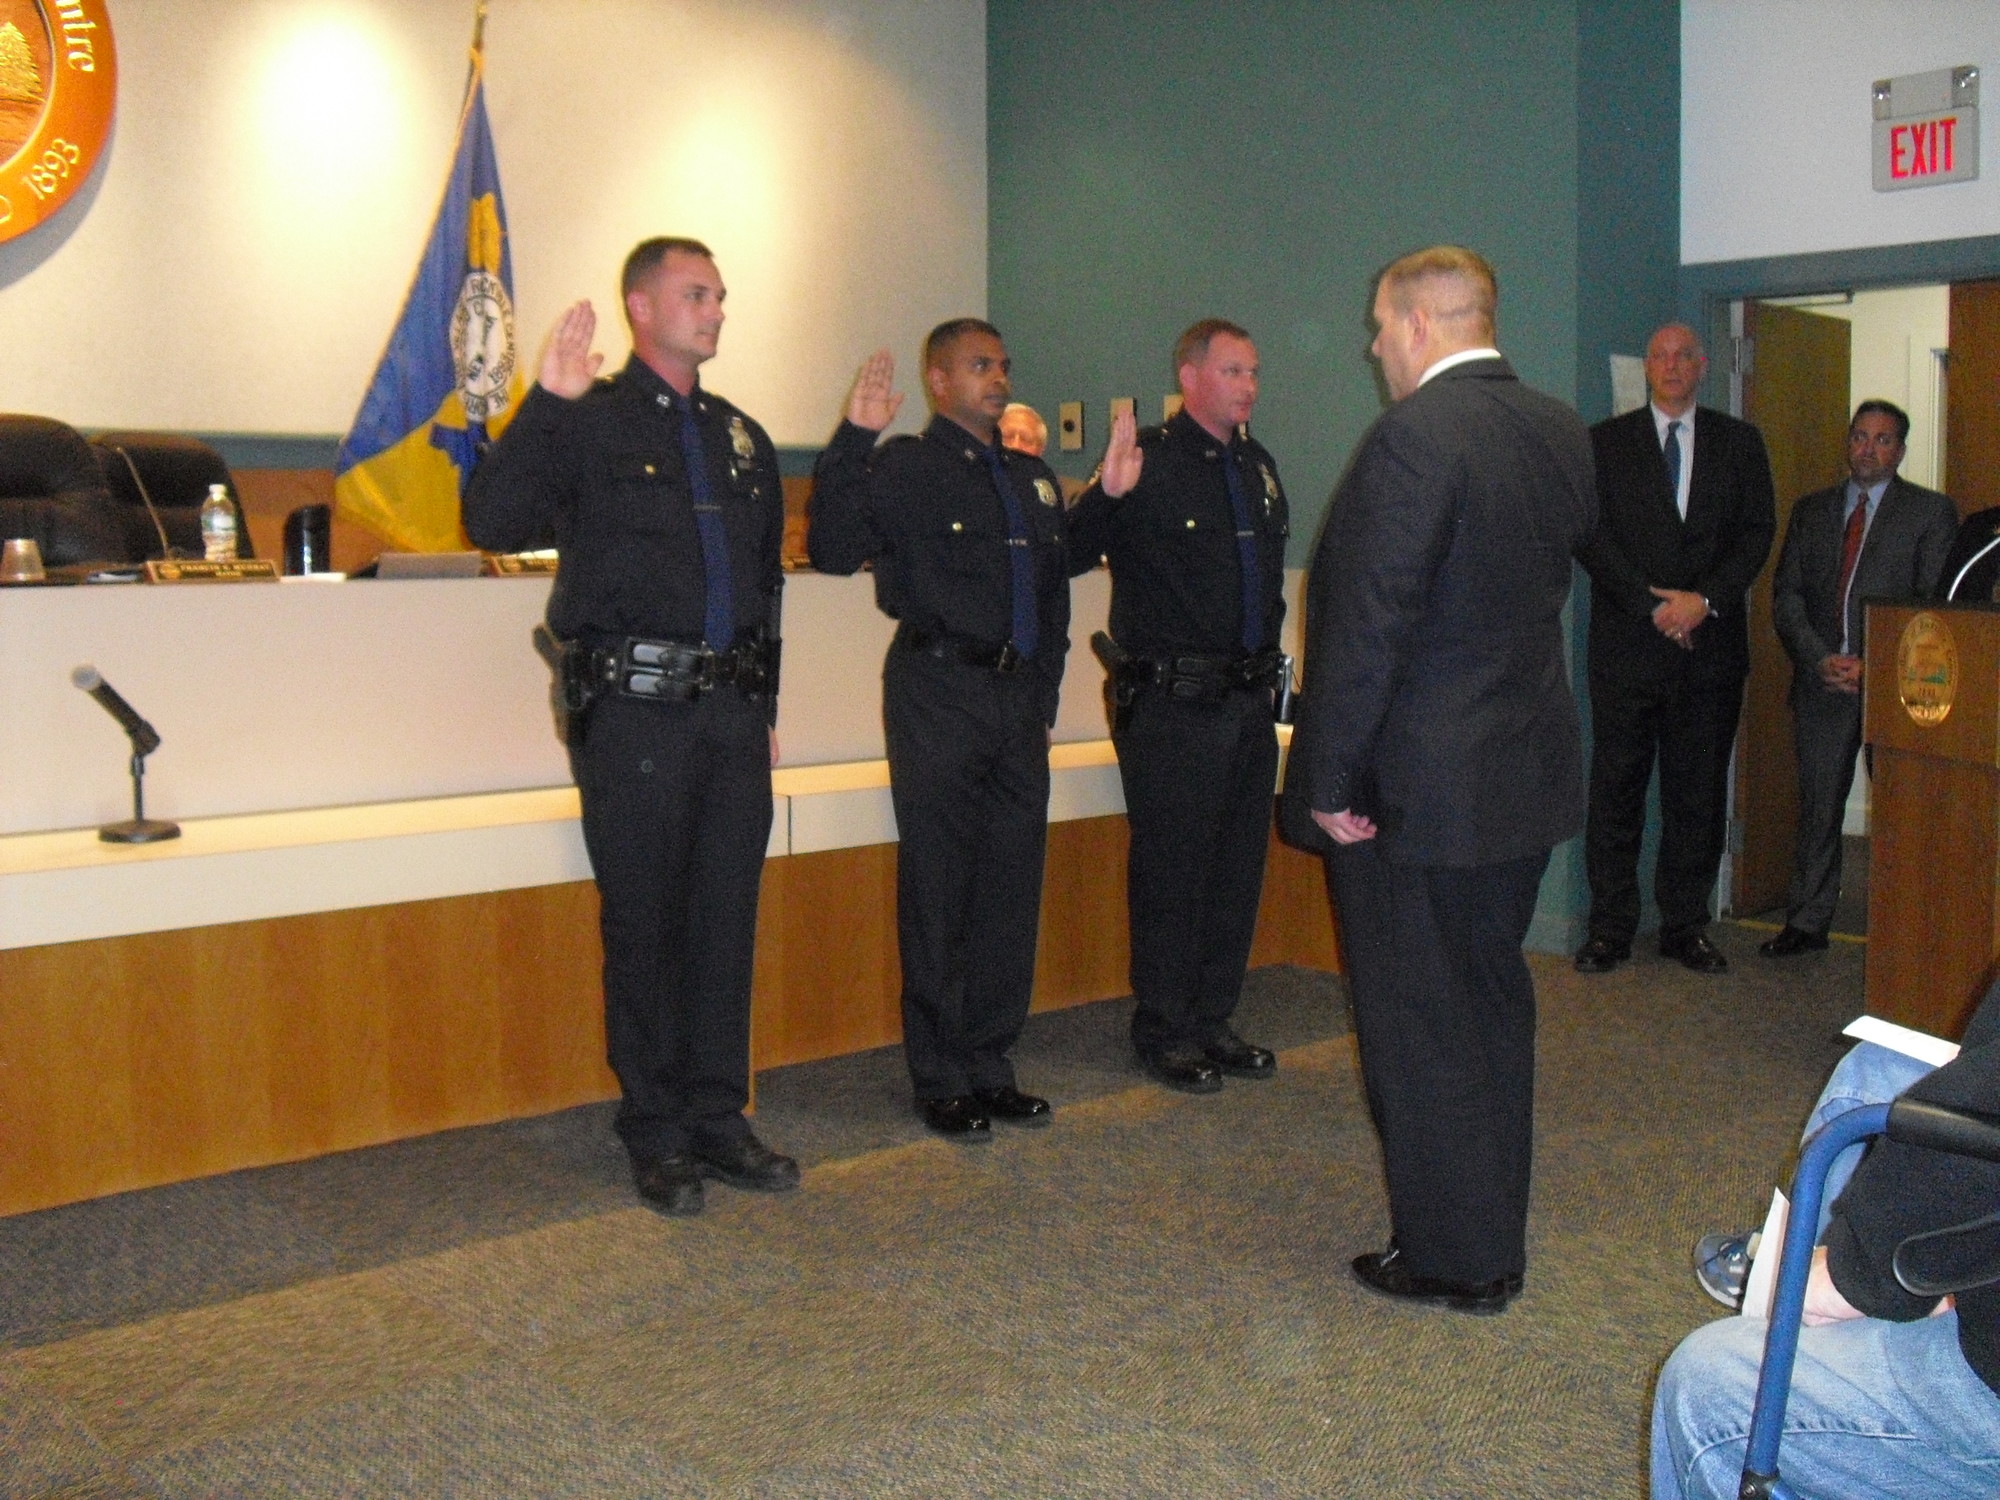 Police Commissioner Charles Gennario, right, swore in, from left, John Murphy, Sal Thomas and Cory Bloch as new officers.